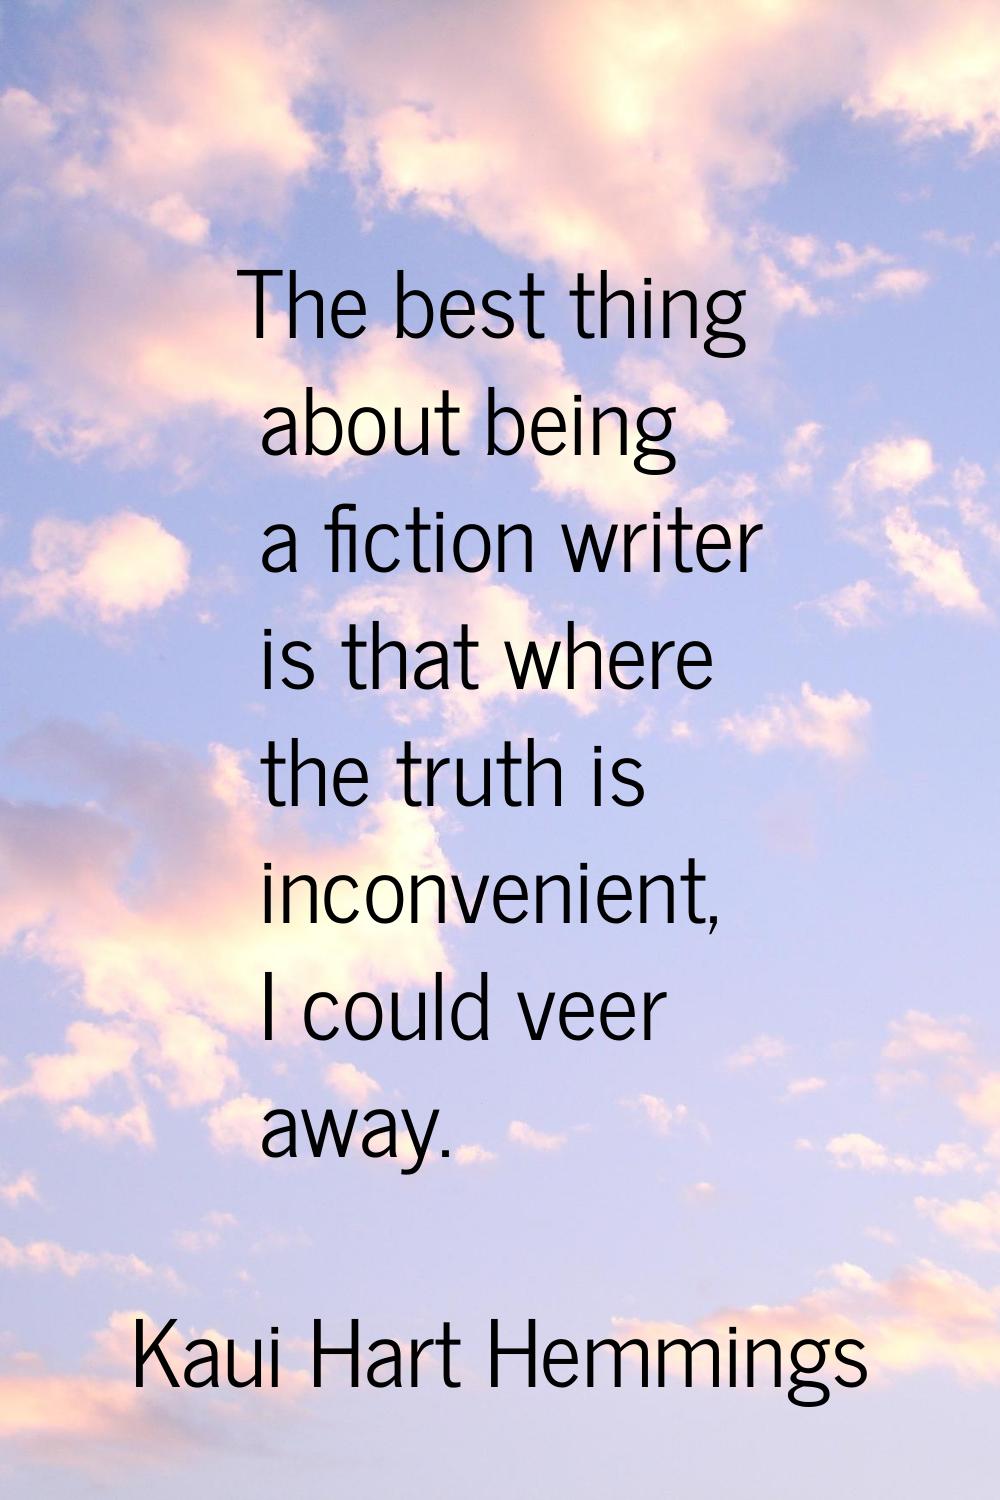 The best thing about being a fiction writer is that where the truth is inconvenient, I could veer a